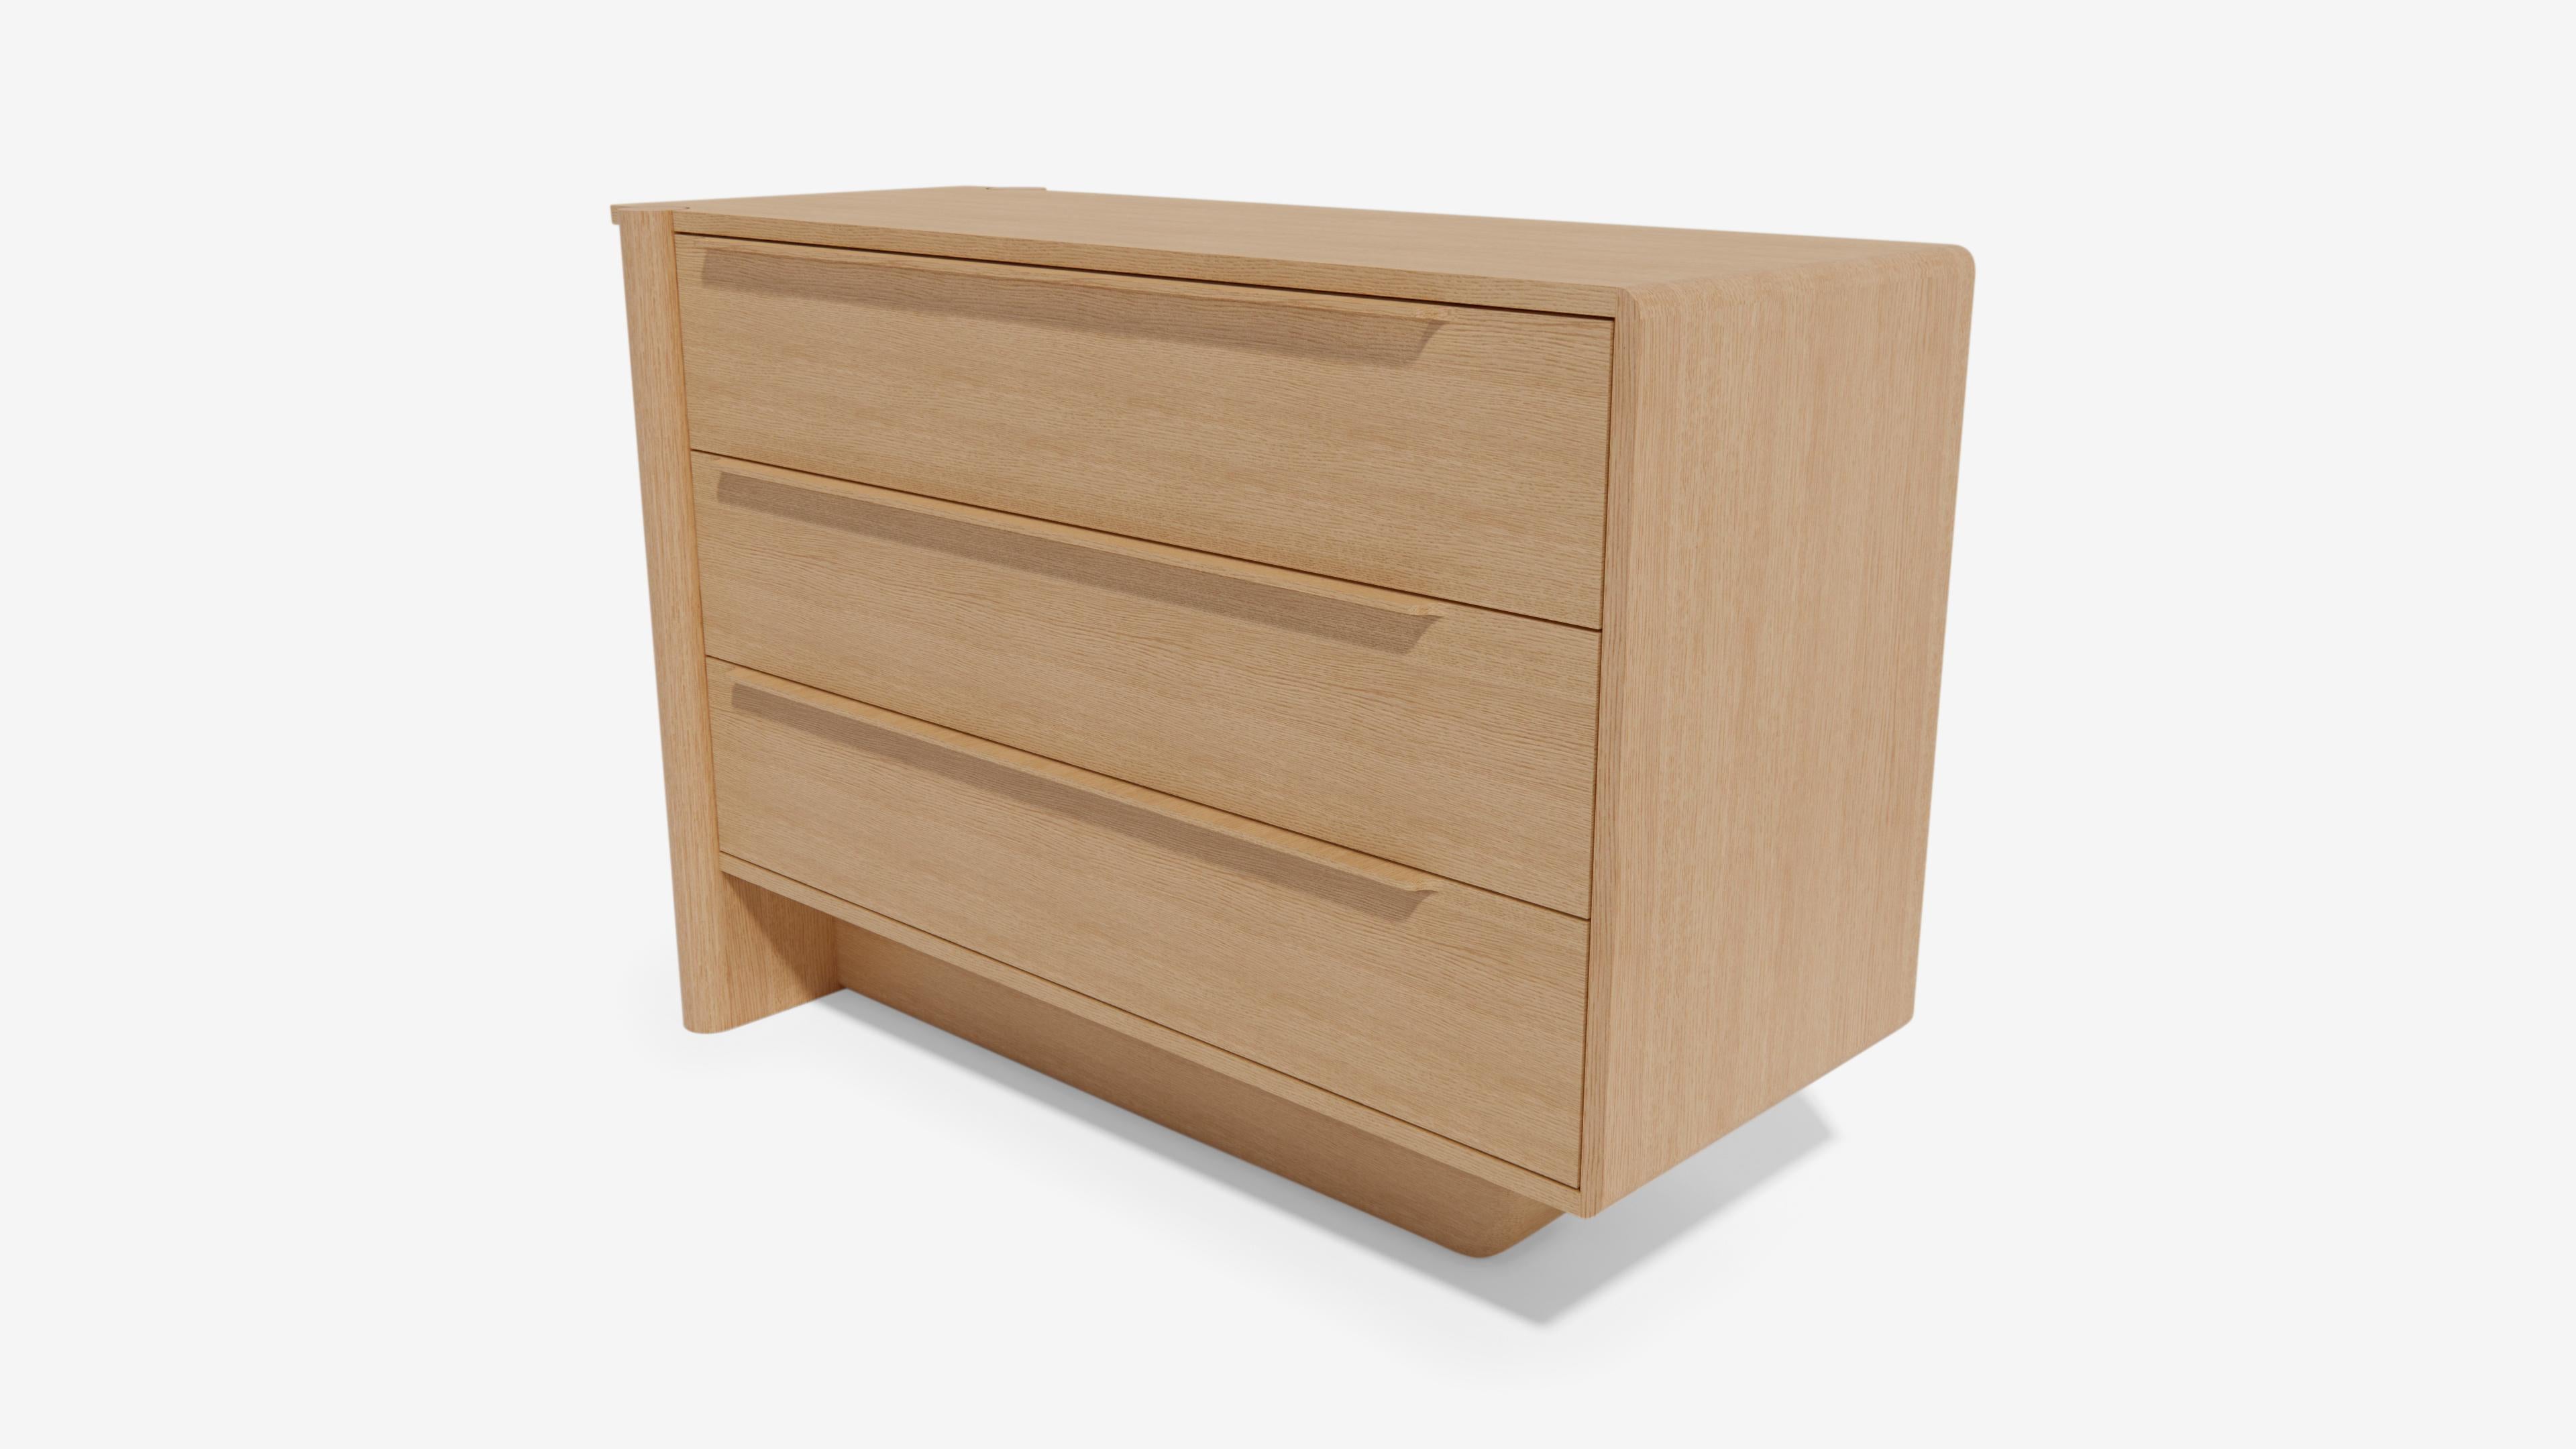 The Sulaco three drawer dresser features an elevated blend of clean lines with its organic form all while providing a tailored look. Generous 8” tall by15” deep drawers yield an ample amount of storage for sleek organization. 

48